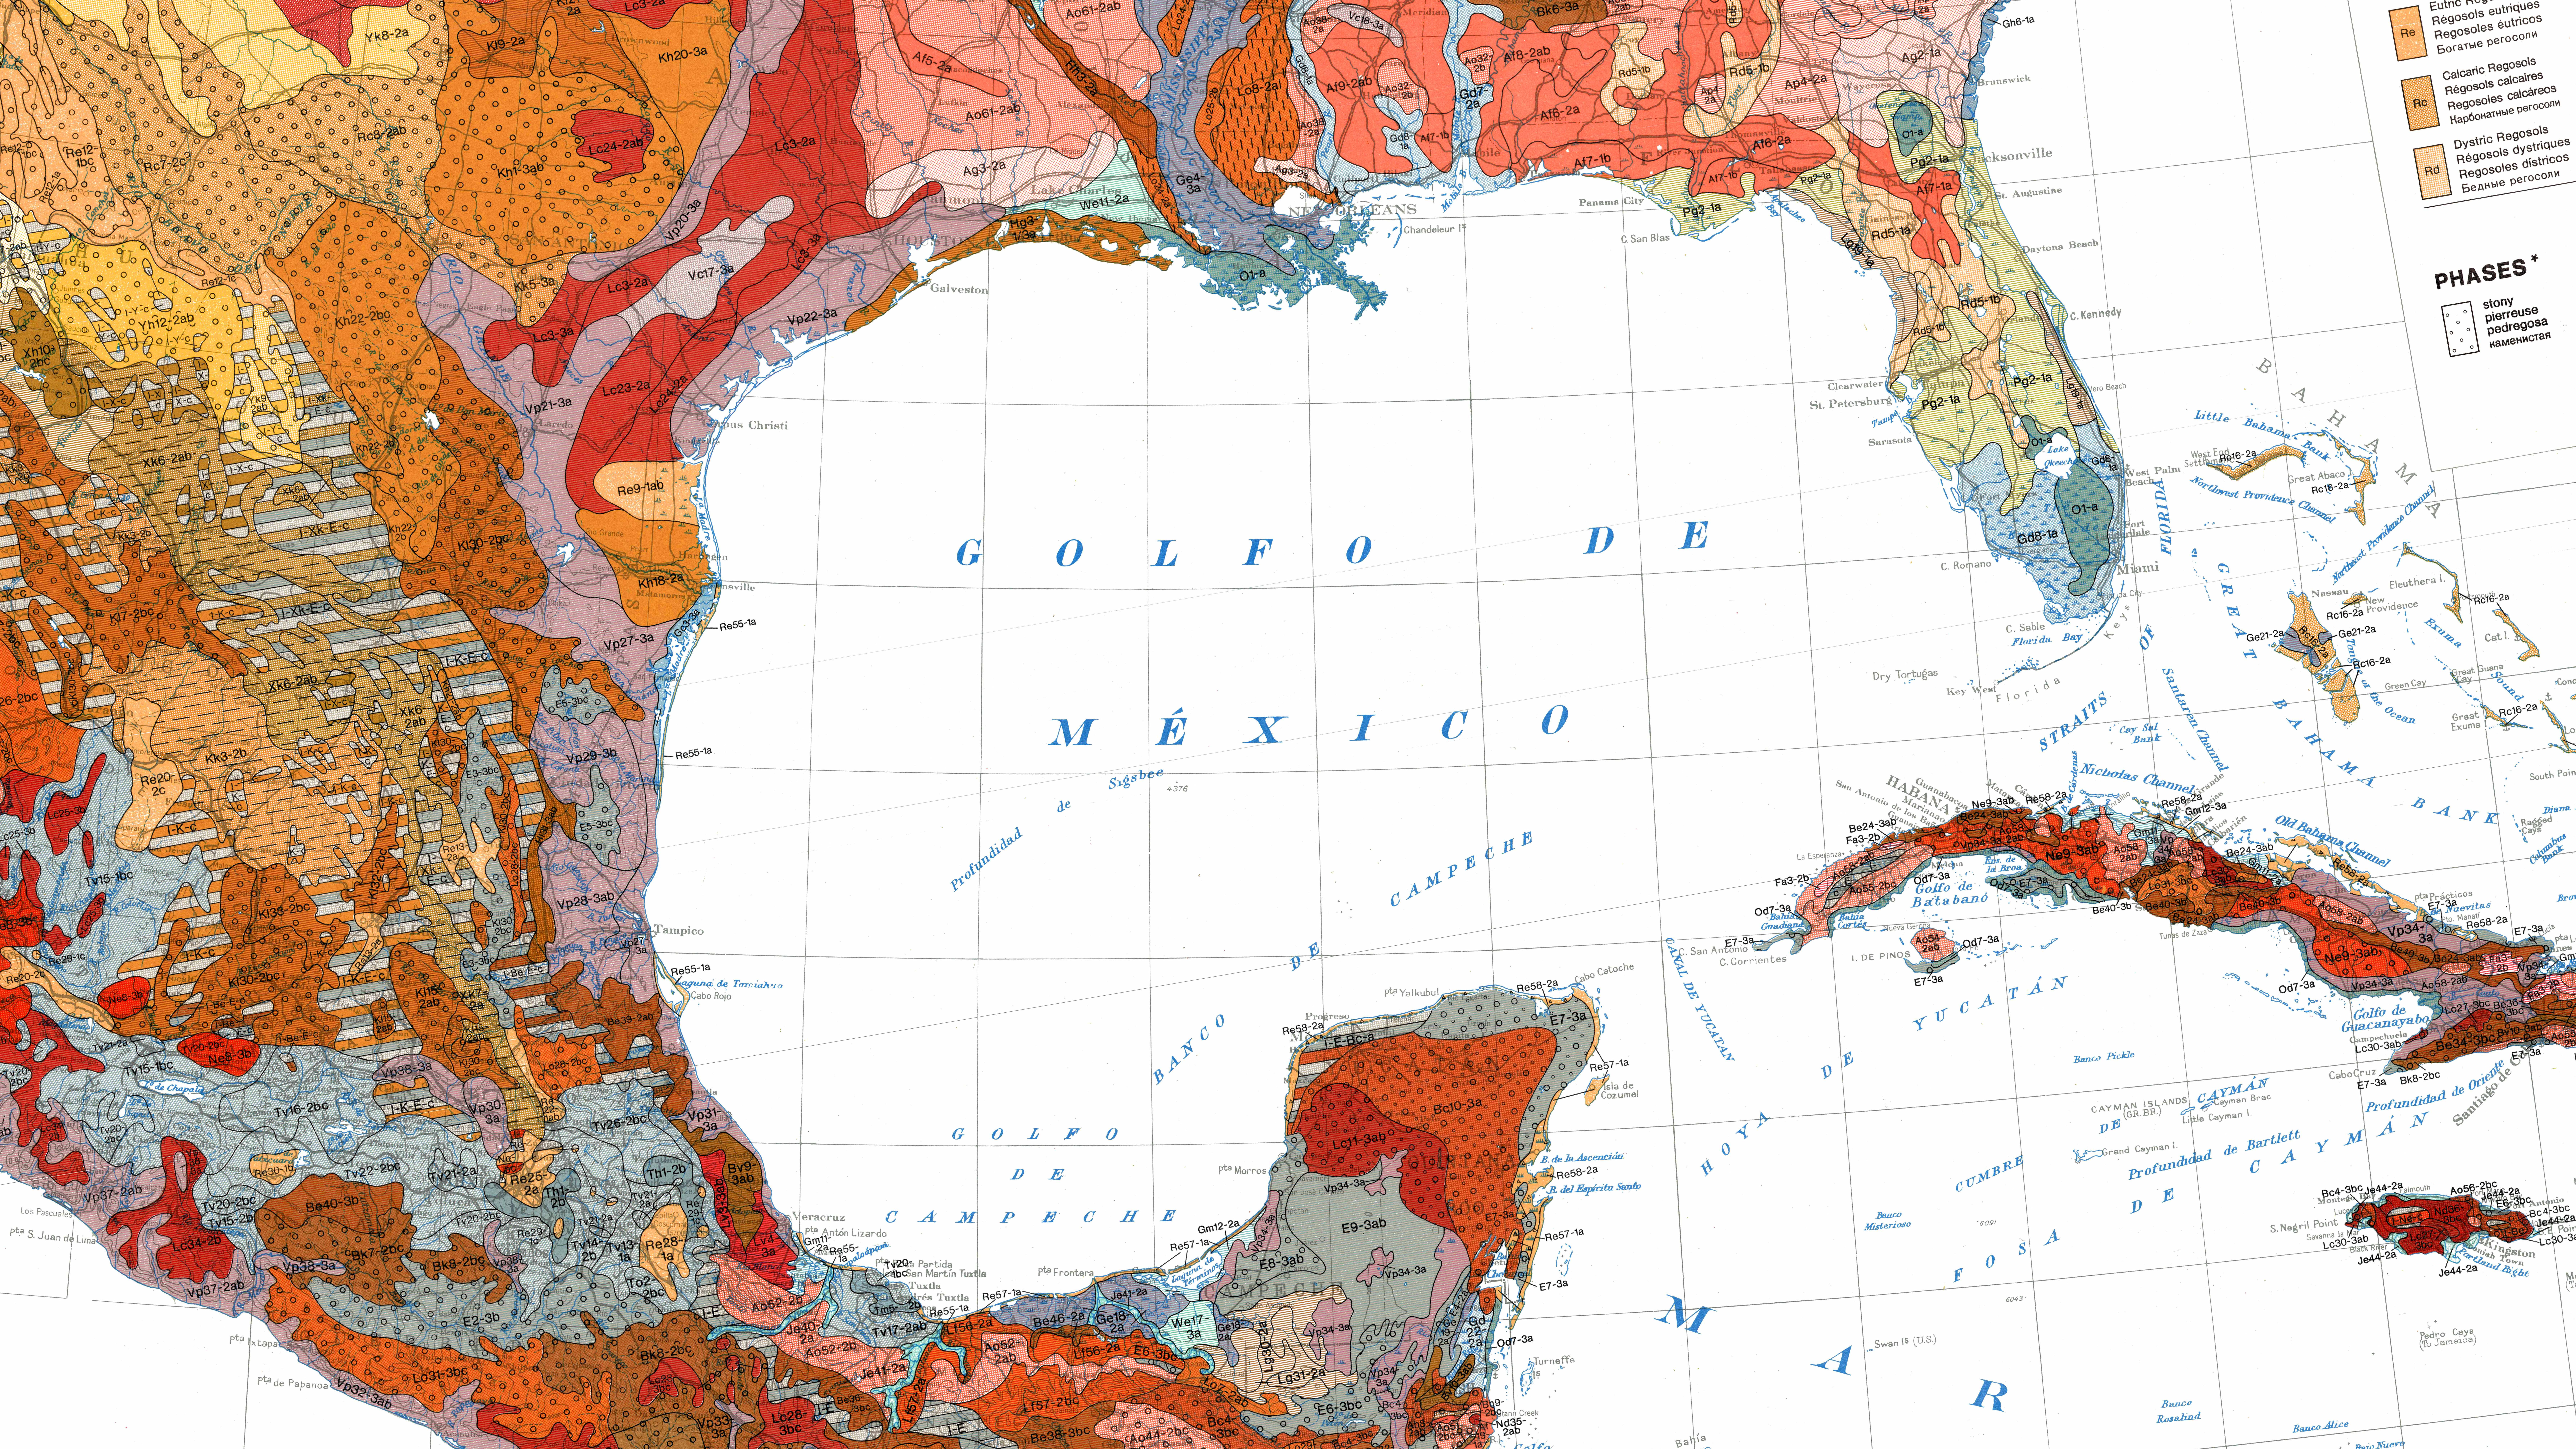 A map, richly colored in oranges, yellows, and light blues, shows the varying soil types that surround the Gulf of Mexico.